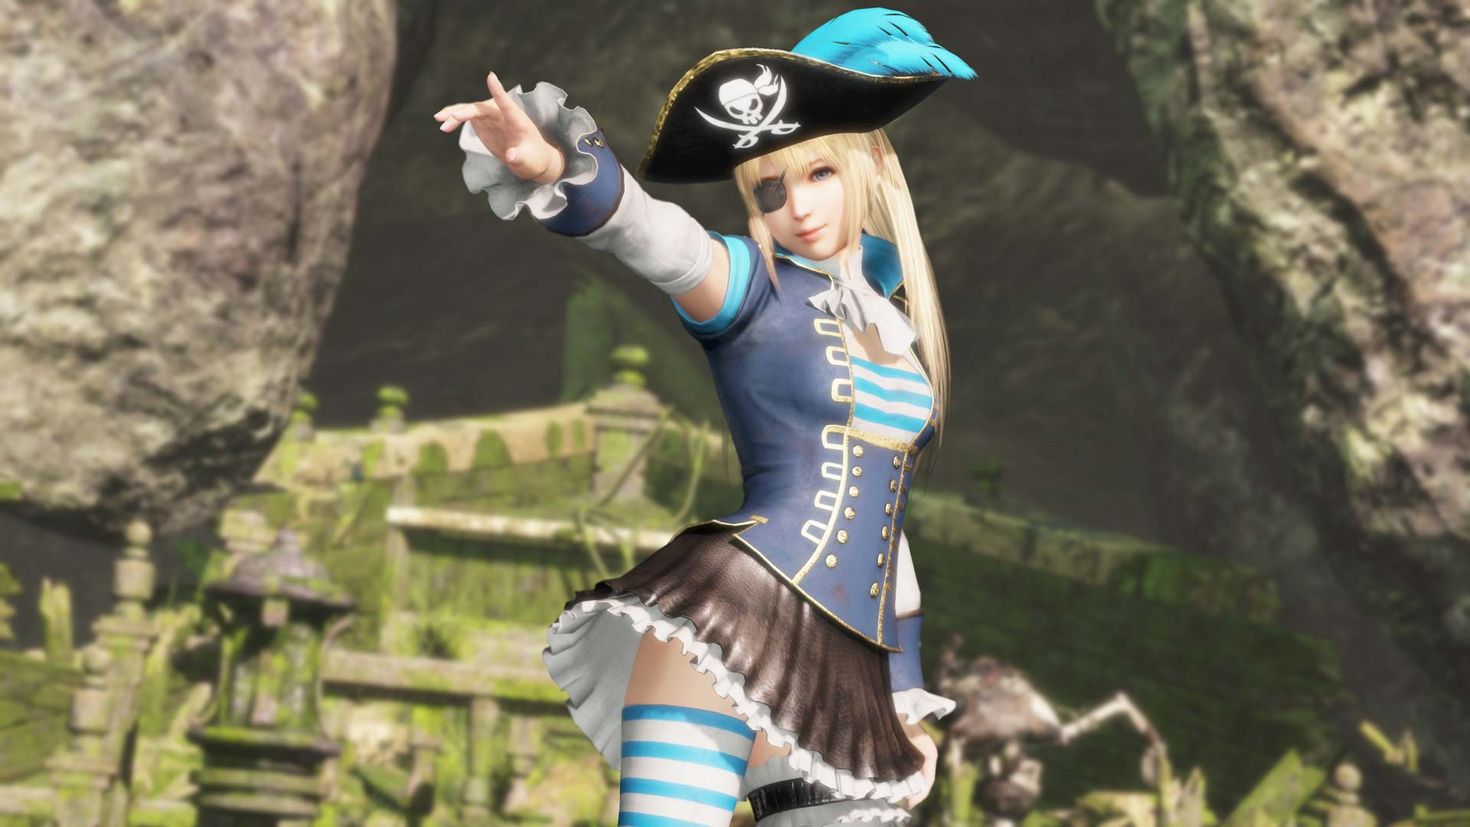 Marie game. Doa6 Pirates of the 7 Seas Costumes Vol.2 Set. Marie Rose обои. Rise of the Pirates.